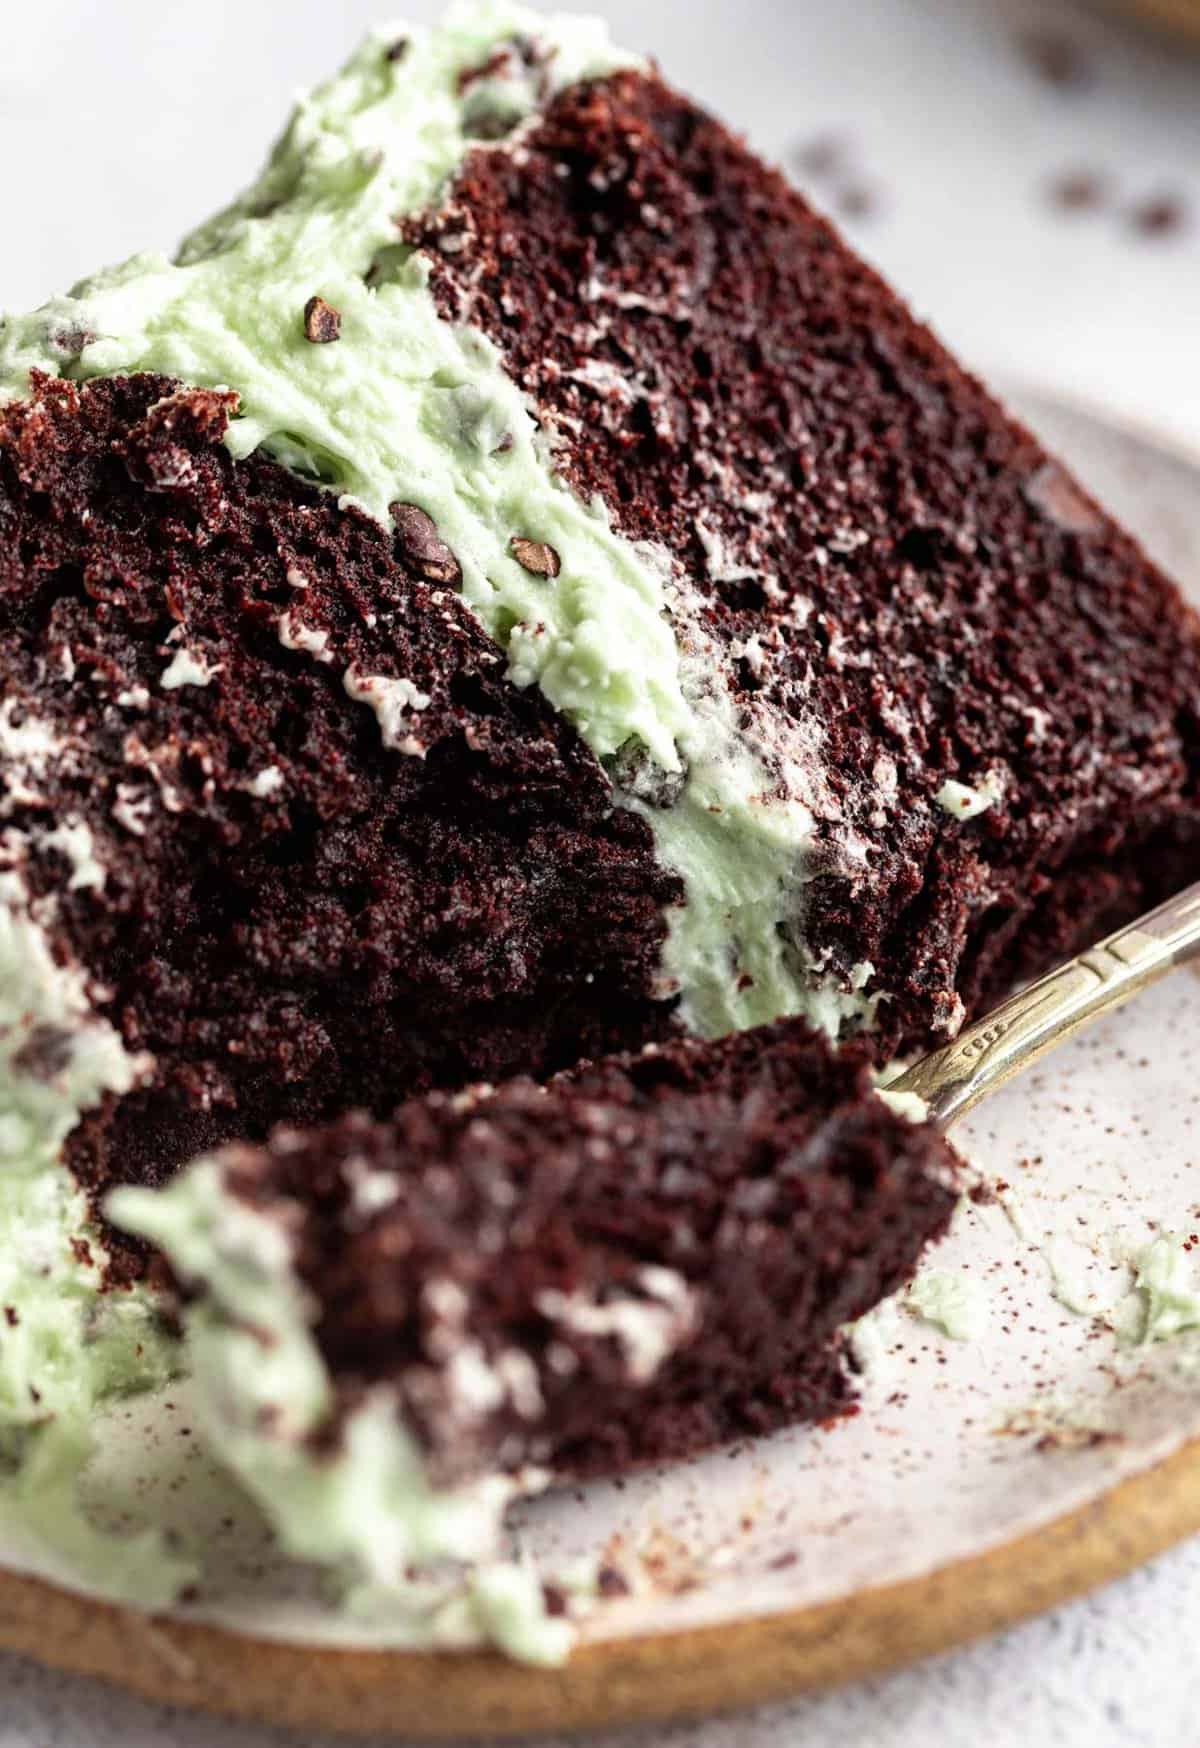 up close of the gluten free mint chocolate cake with a bite taken out